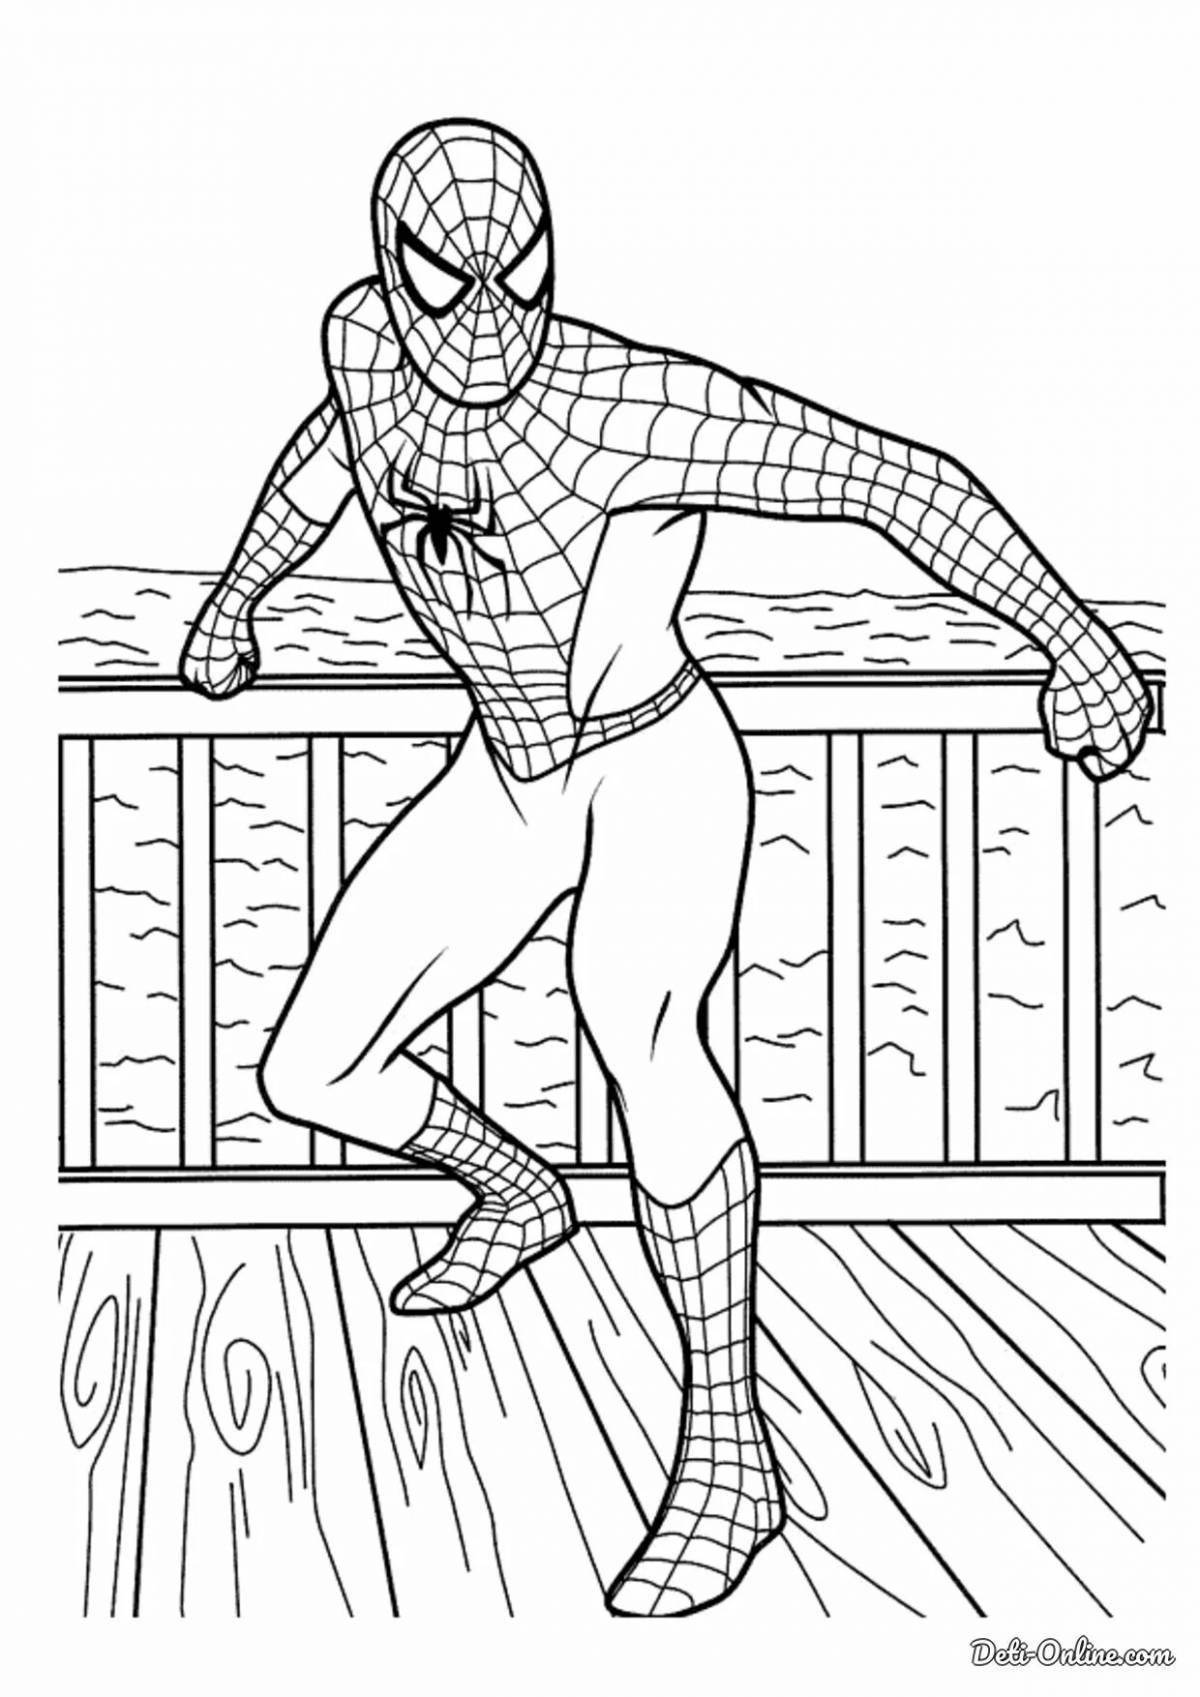 Coloring page amazing spiderman